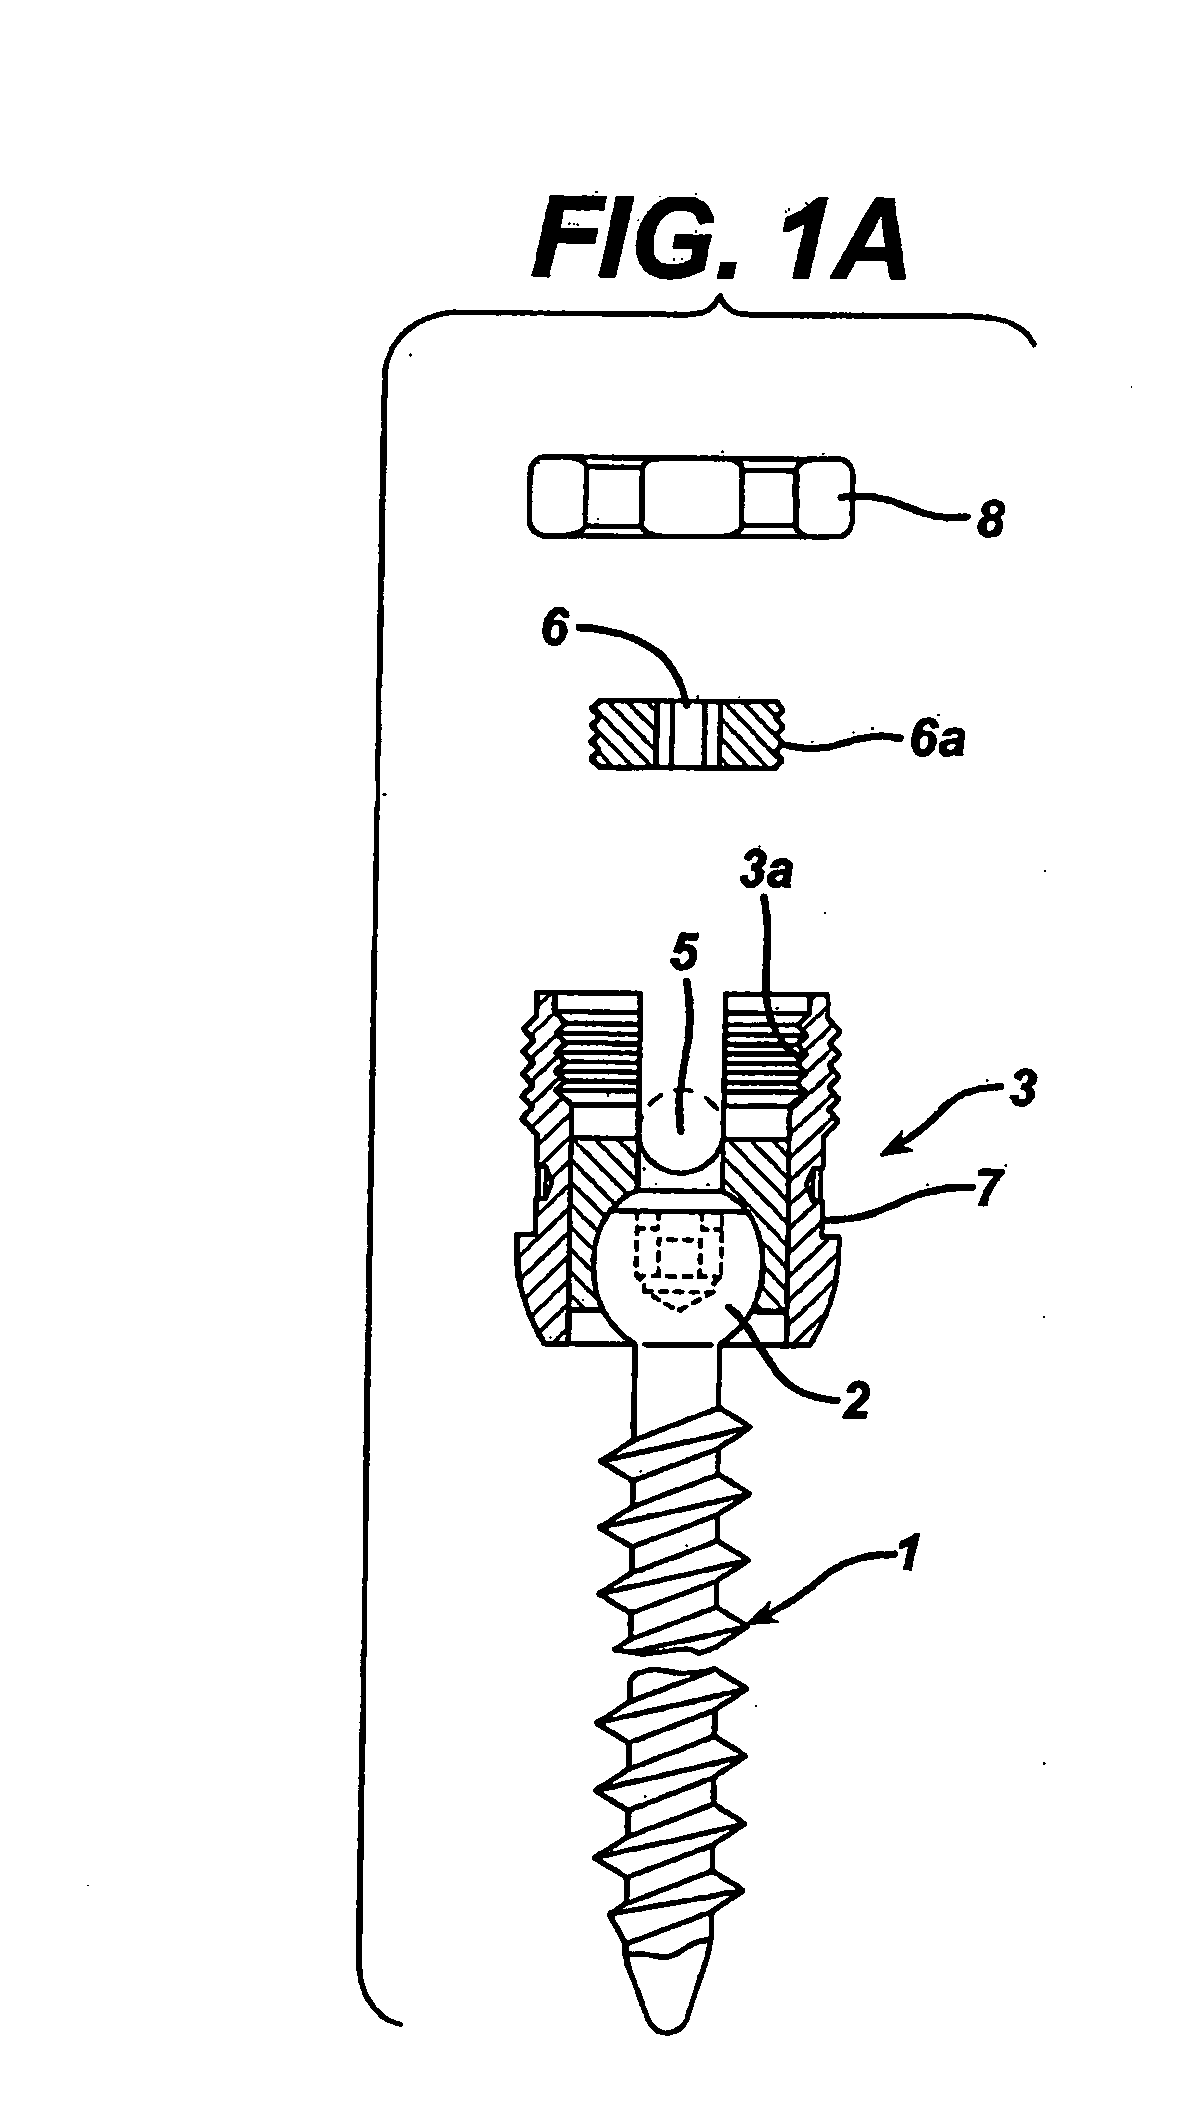 Locking cap assembly for spinal fixation instrumentation